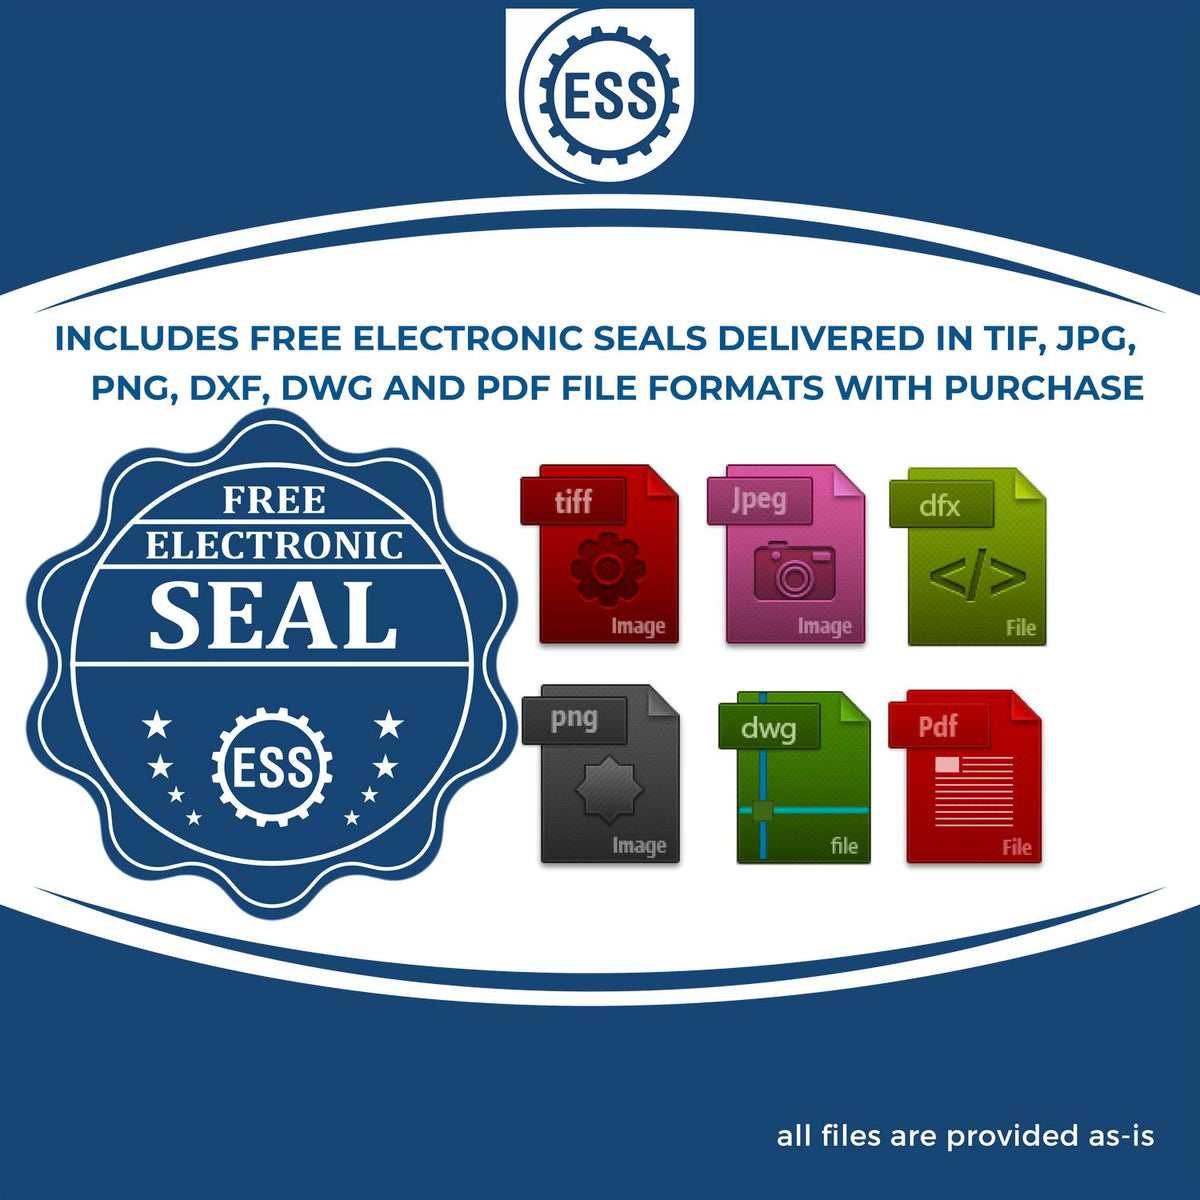 An infographic for the free electronic seal for the Heavy Duty Cast Iron Virginia Geologist Seal Embosser illustrating the different file type icons such as DXF, DWG, TIF, JPG and PNG.